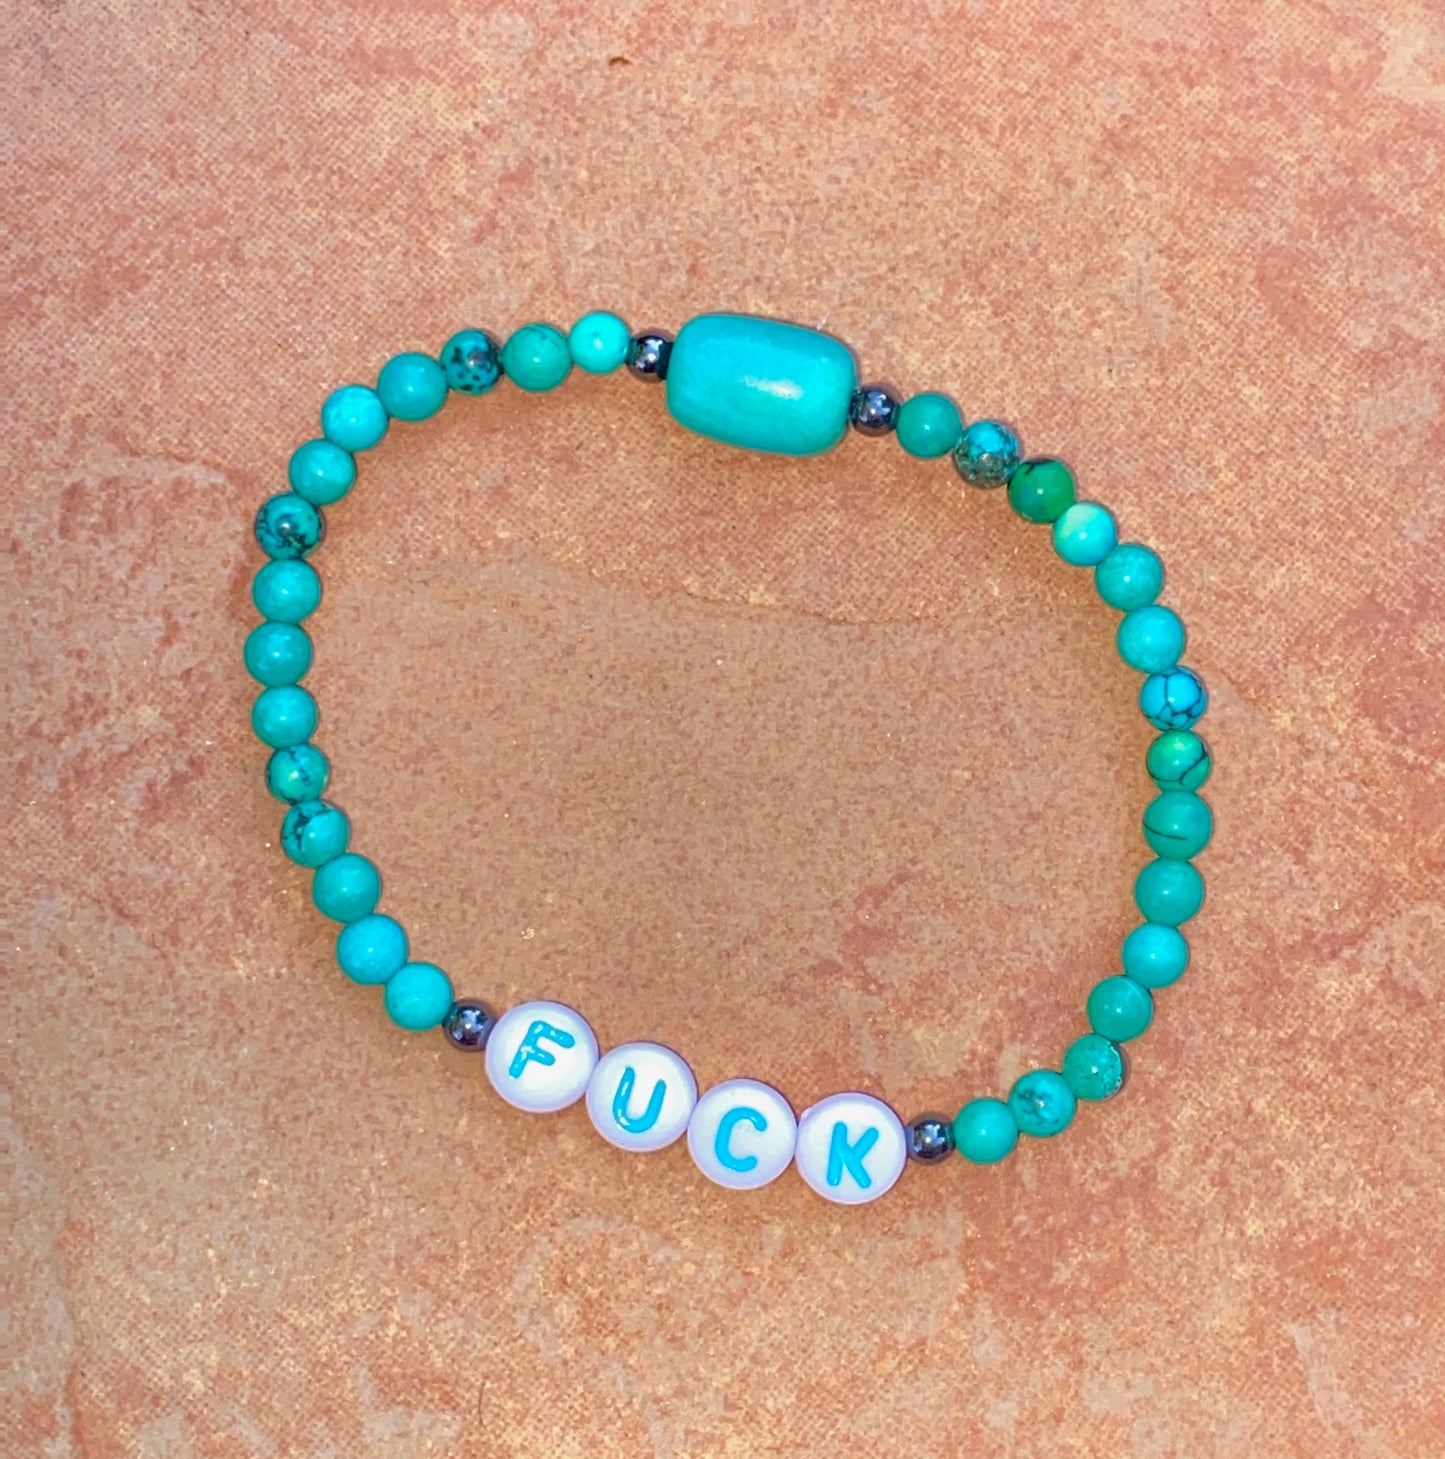 Women's Natural turquoise and hematite "Curse" bracelet